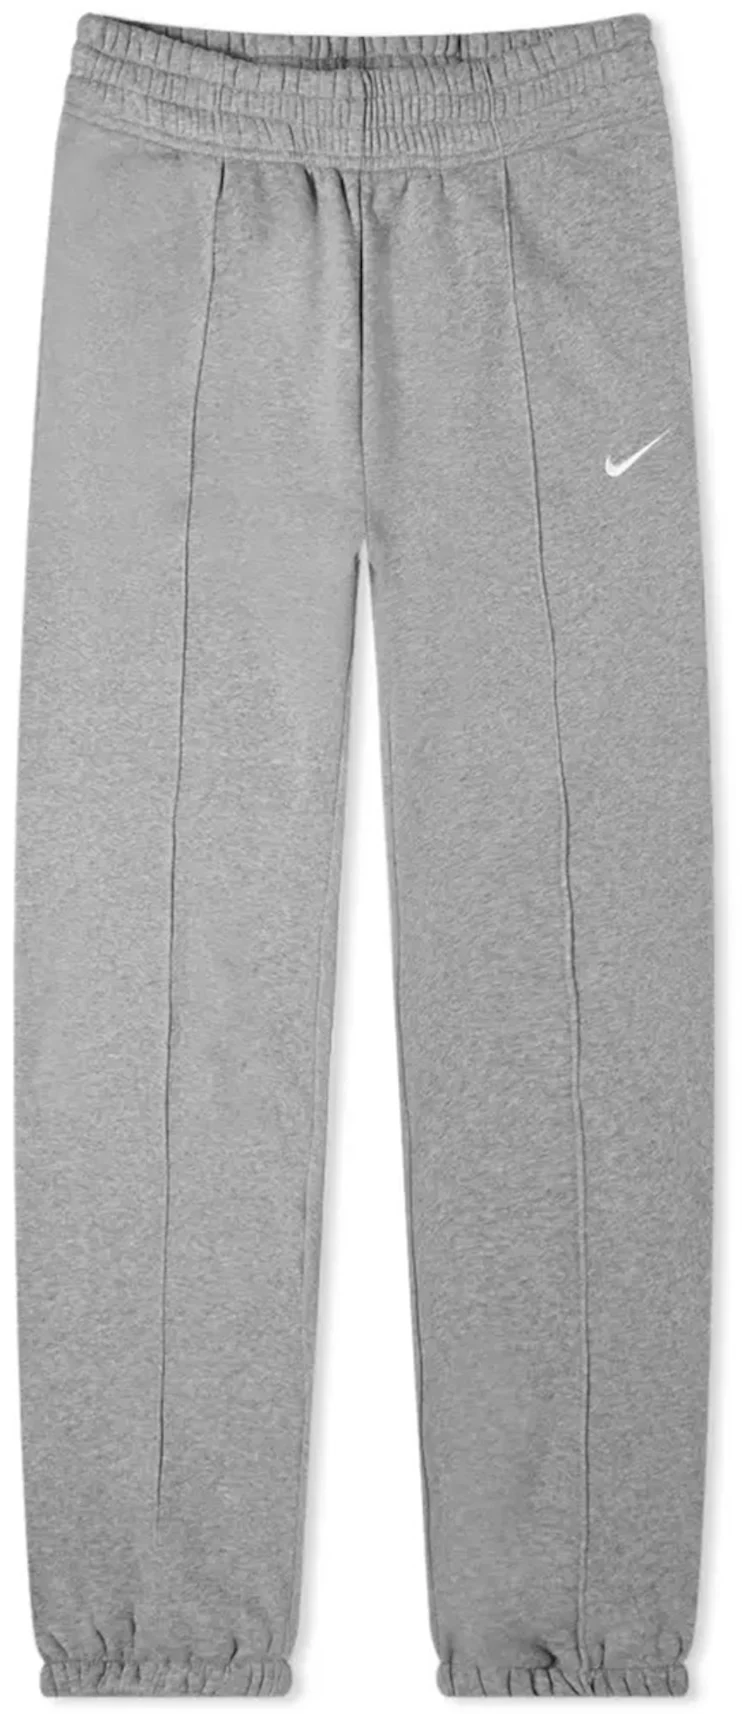 https://images.stockx.com/images/Nike-Womens-Sportswear-Collection-Essential-Fleece-Trousers-Dark-Grey-Heather-White.jpg?fit=fill&bg=FFFFFF&w=1200&h=857&fm=webp&auto=compress&dpr=2&trim=color&updated_at=1653998272&q=60